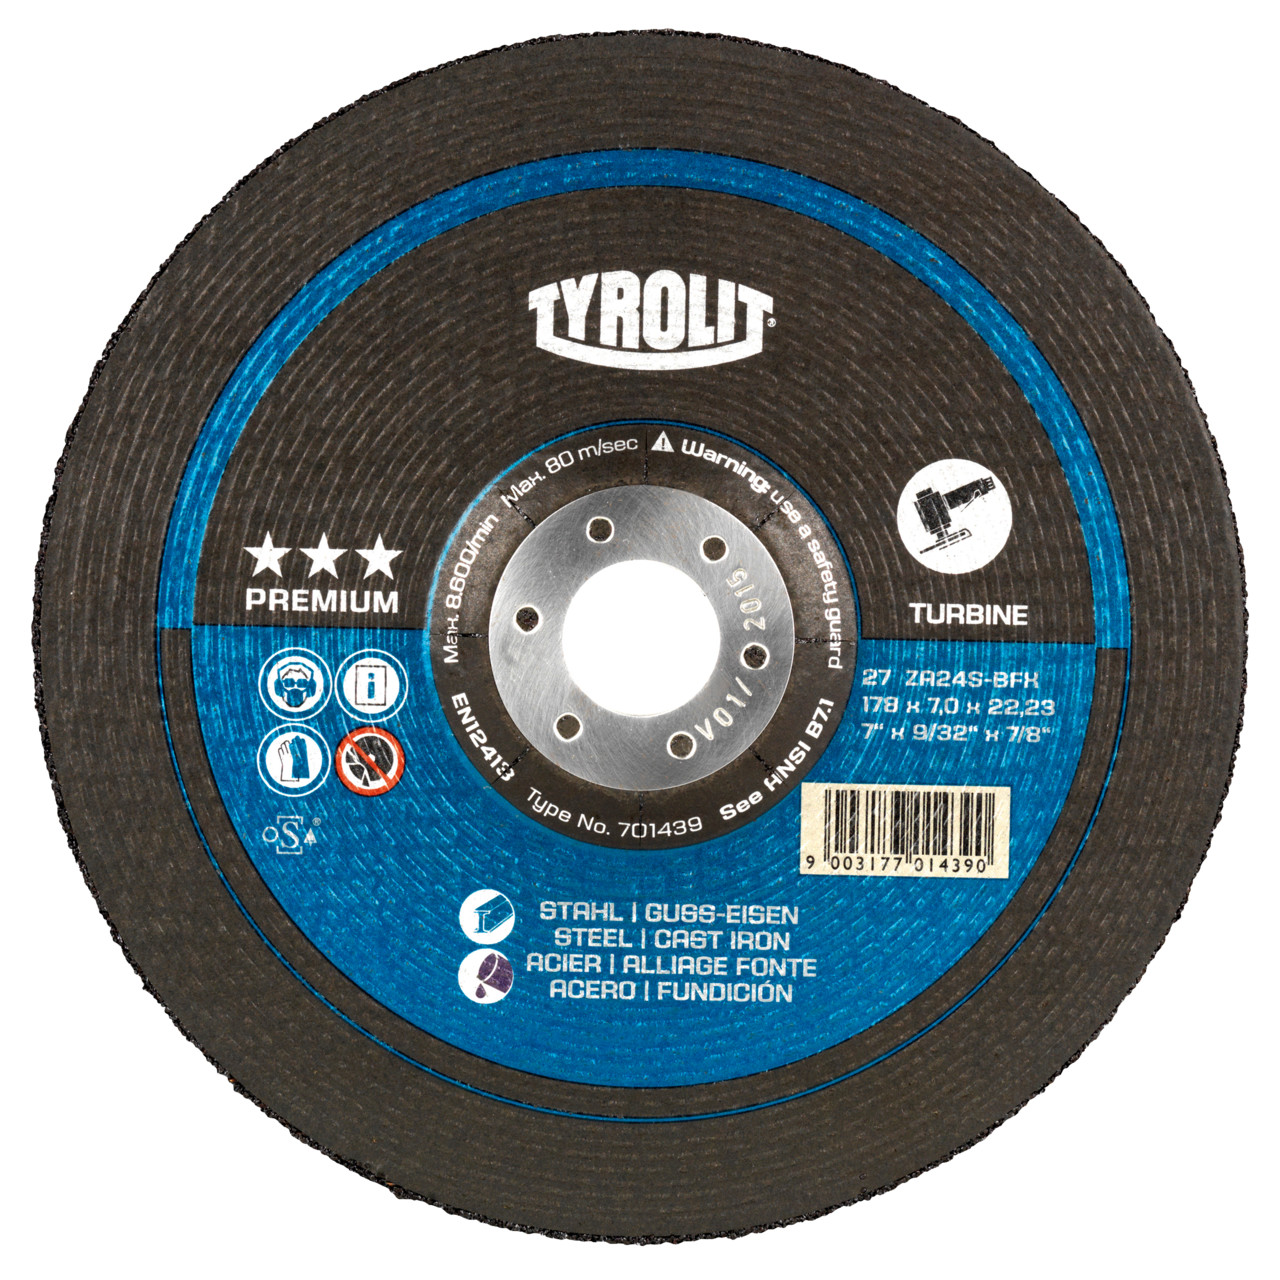 TYROLIT grinding wheel DxUxH 178x7x22.23 T-GRIND for steel and cast iron, shape: 27 - offset version, Art. 701439